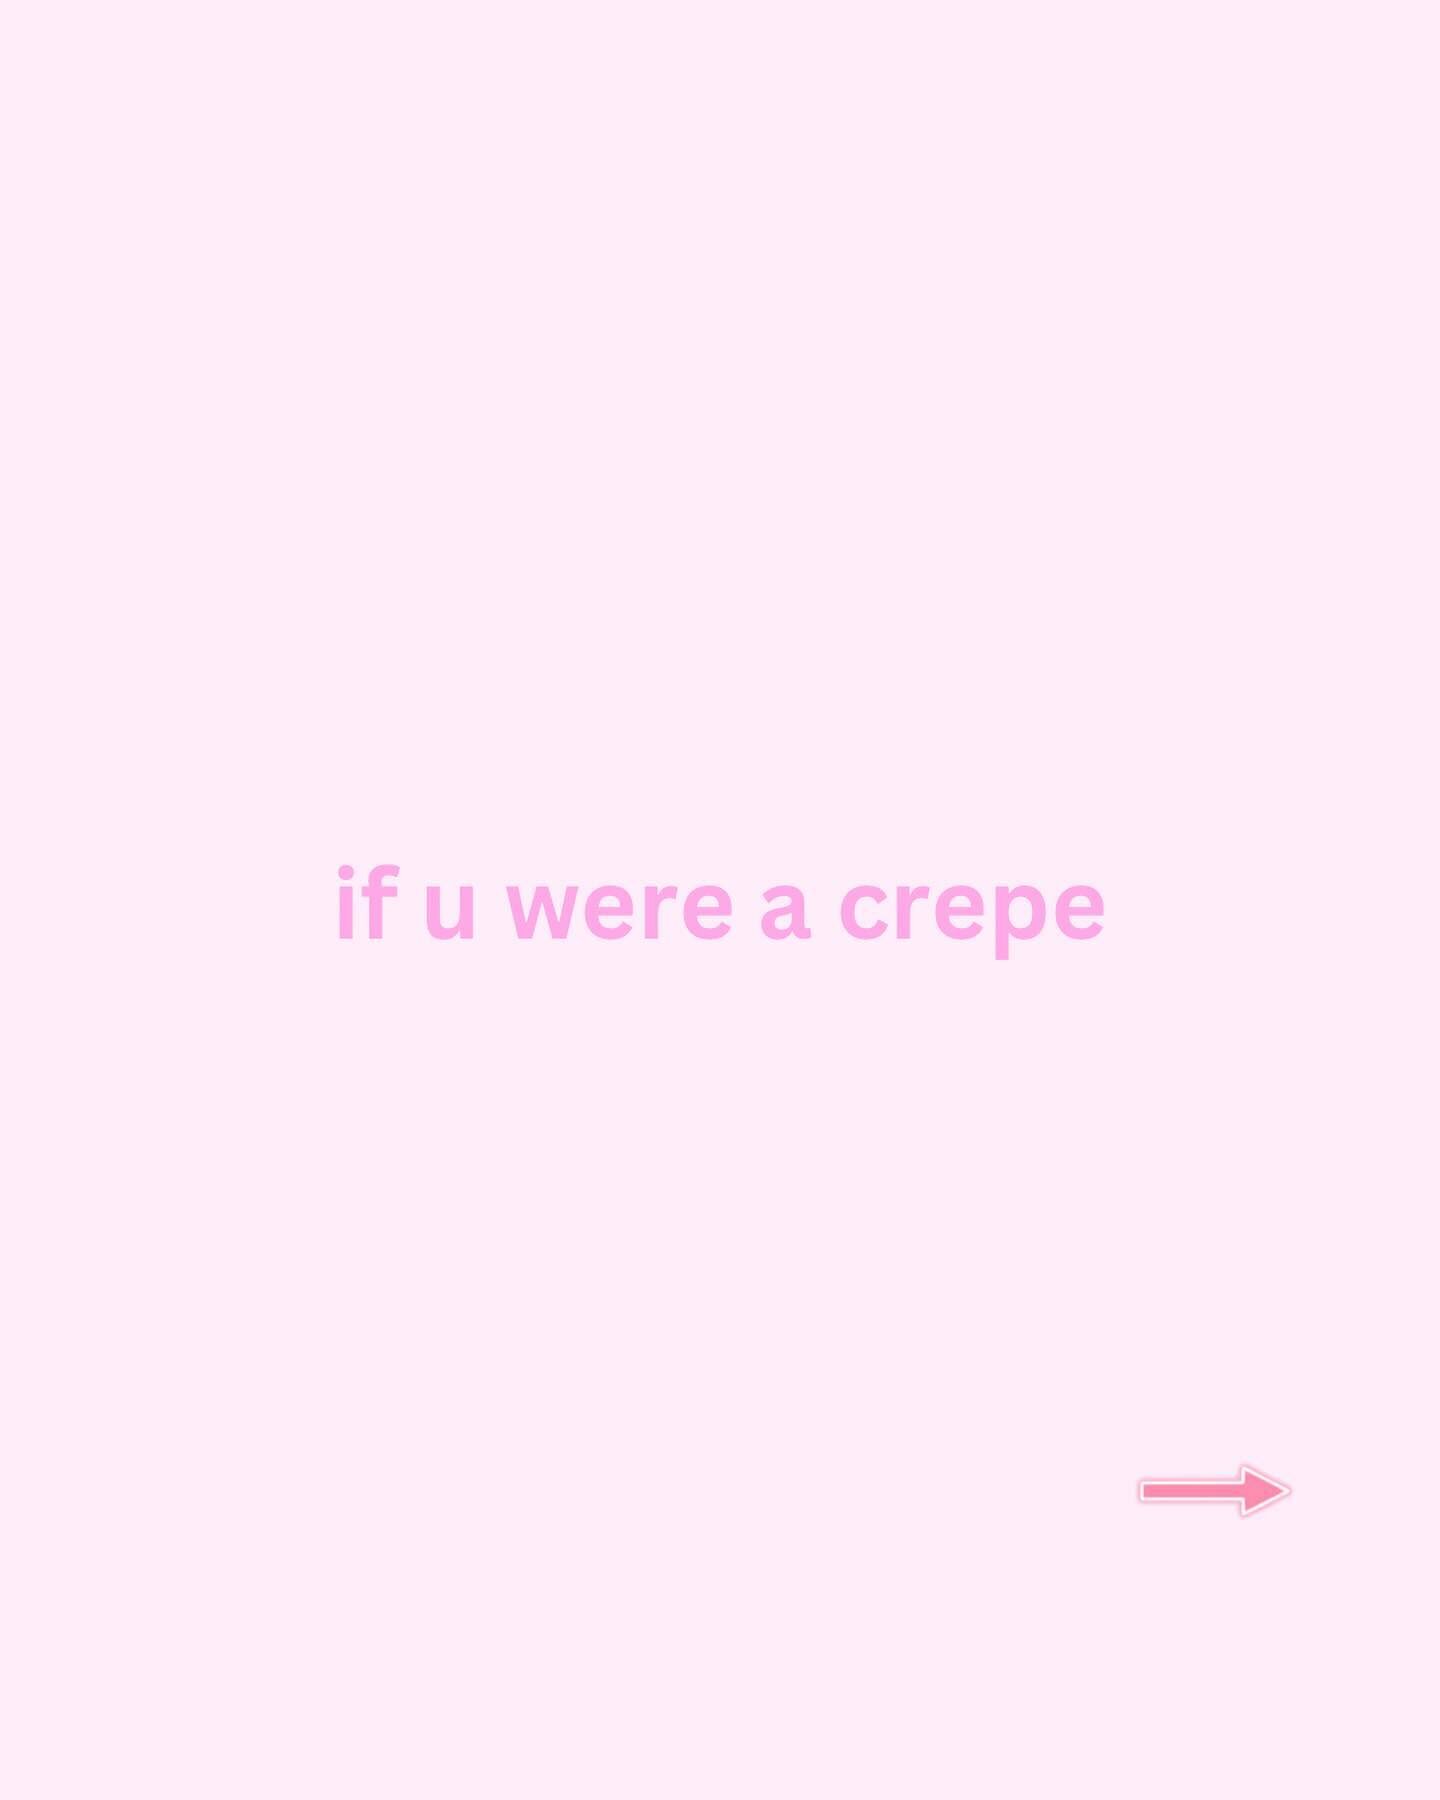 best answer wins a free crepe